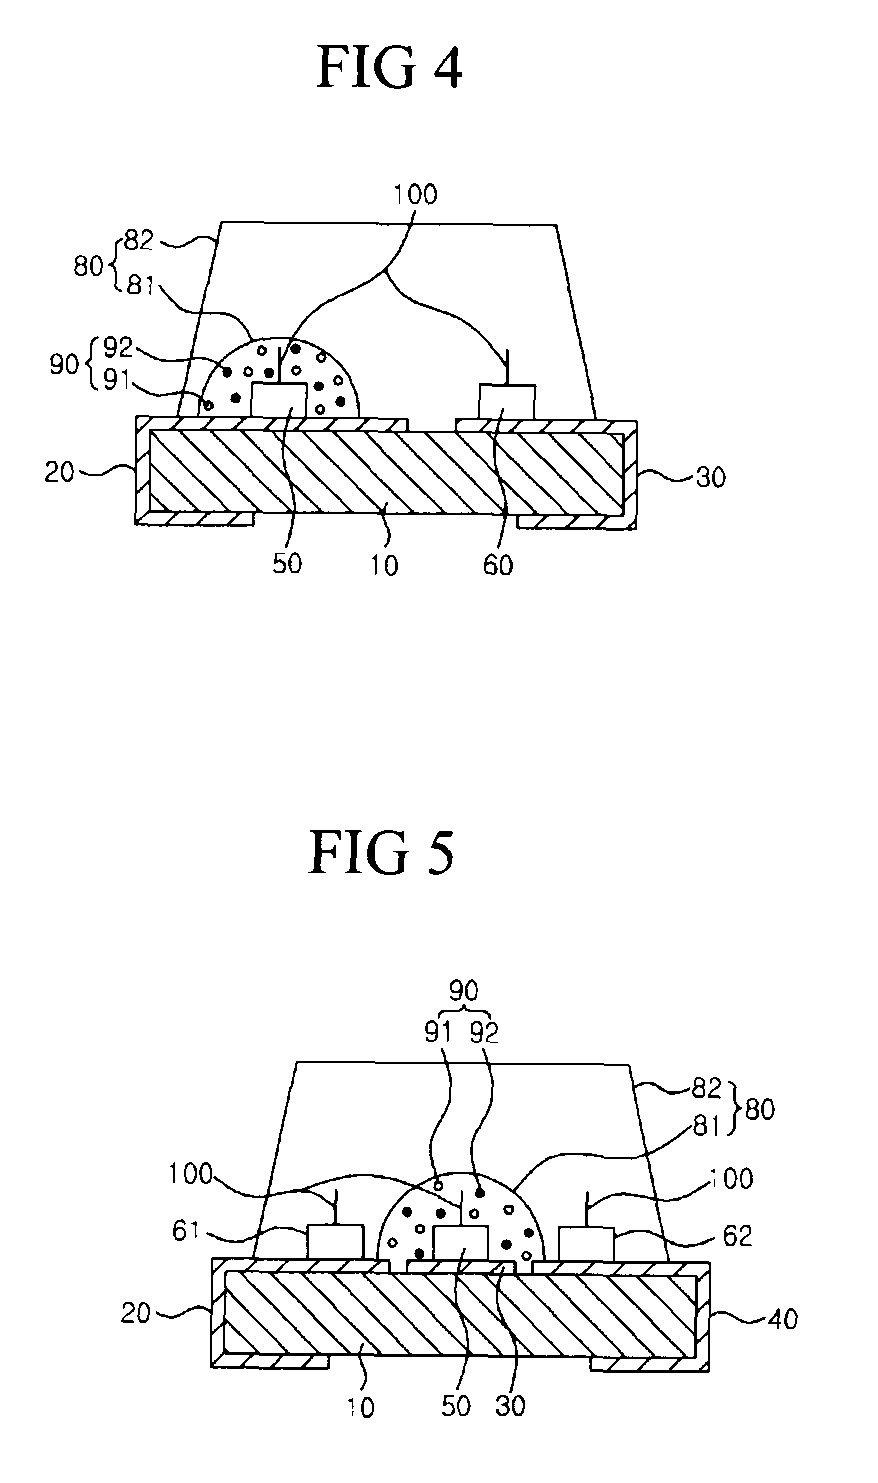 Light emitting device having plural light emitting diodes and at least one phosphor for emitting different wavelengths of light